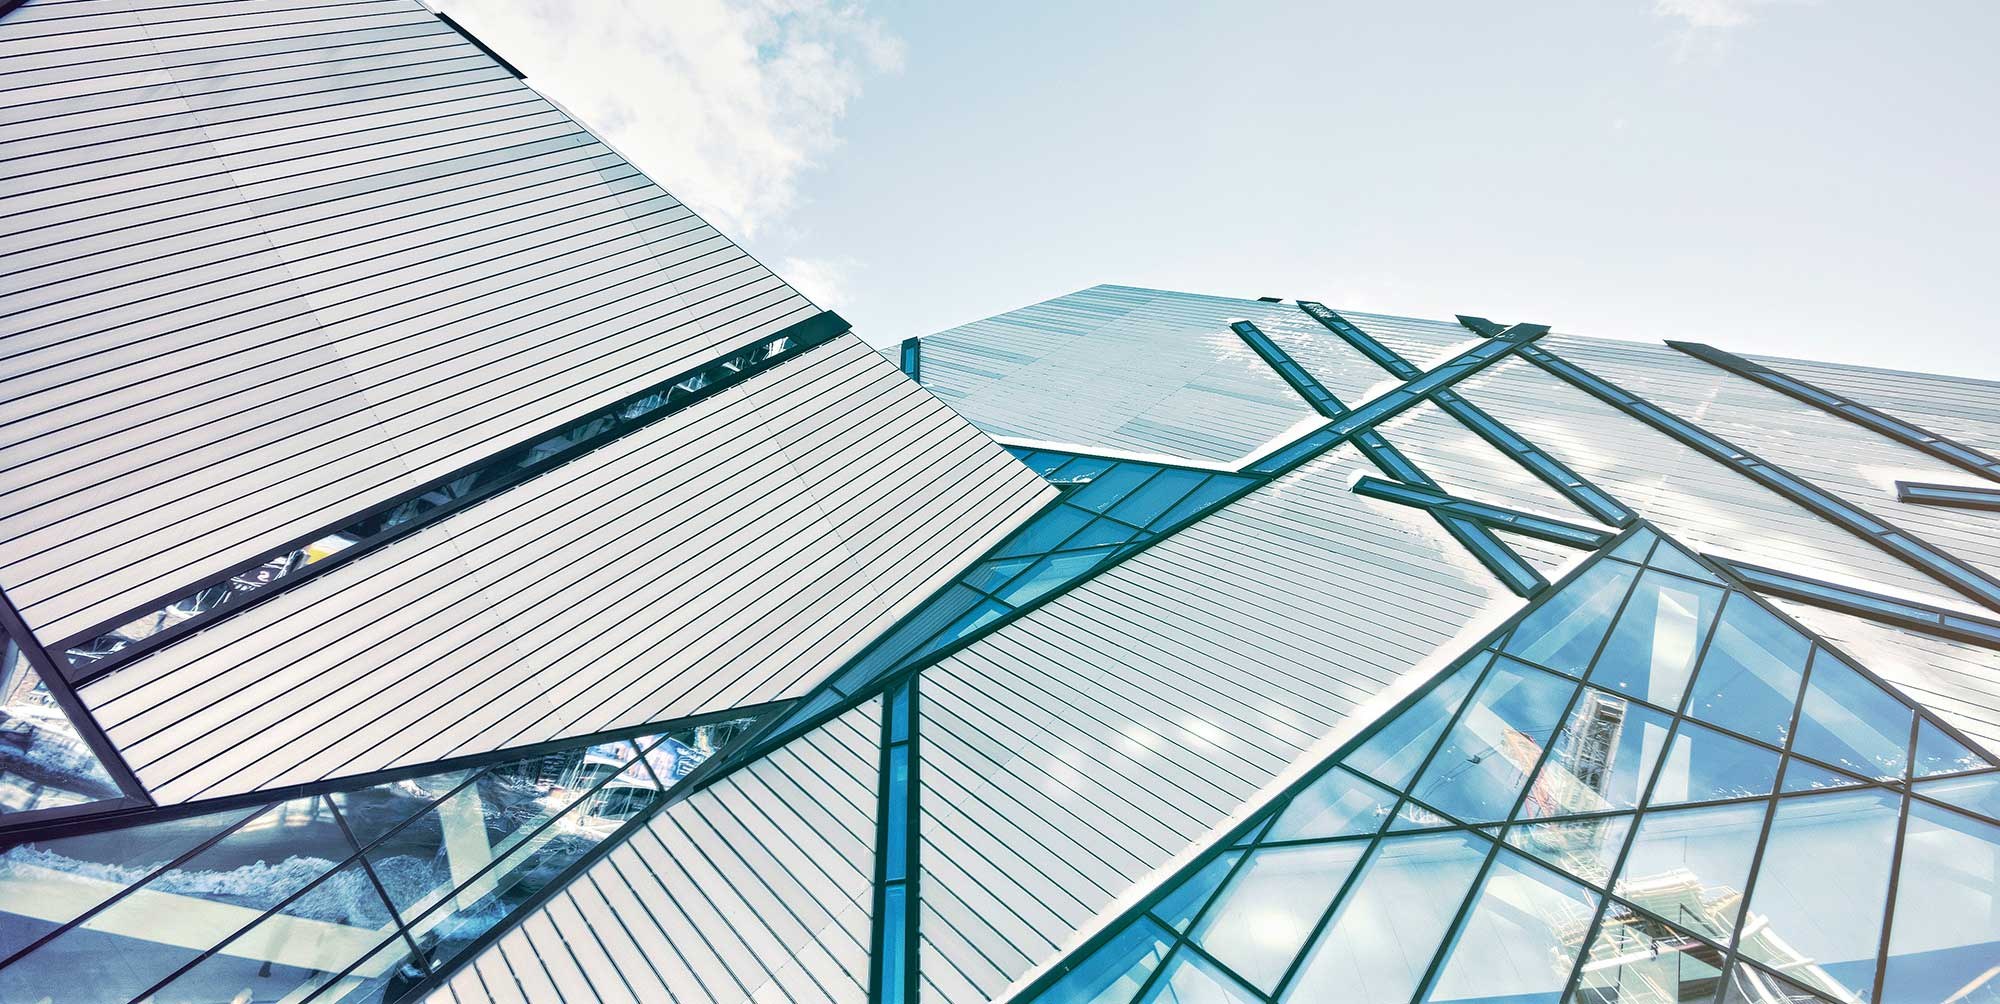 Abstract Image of Office Buildings